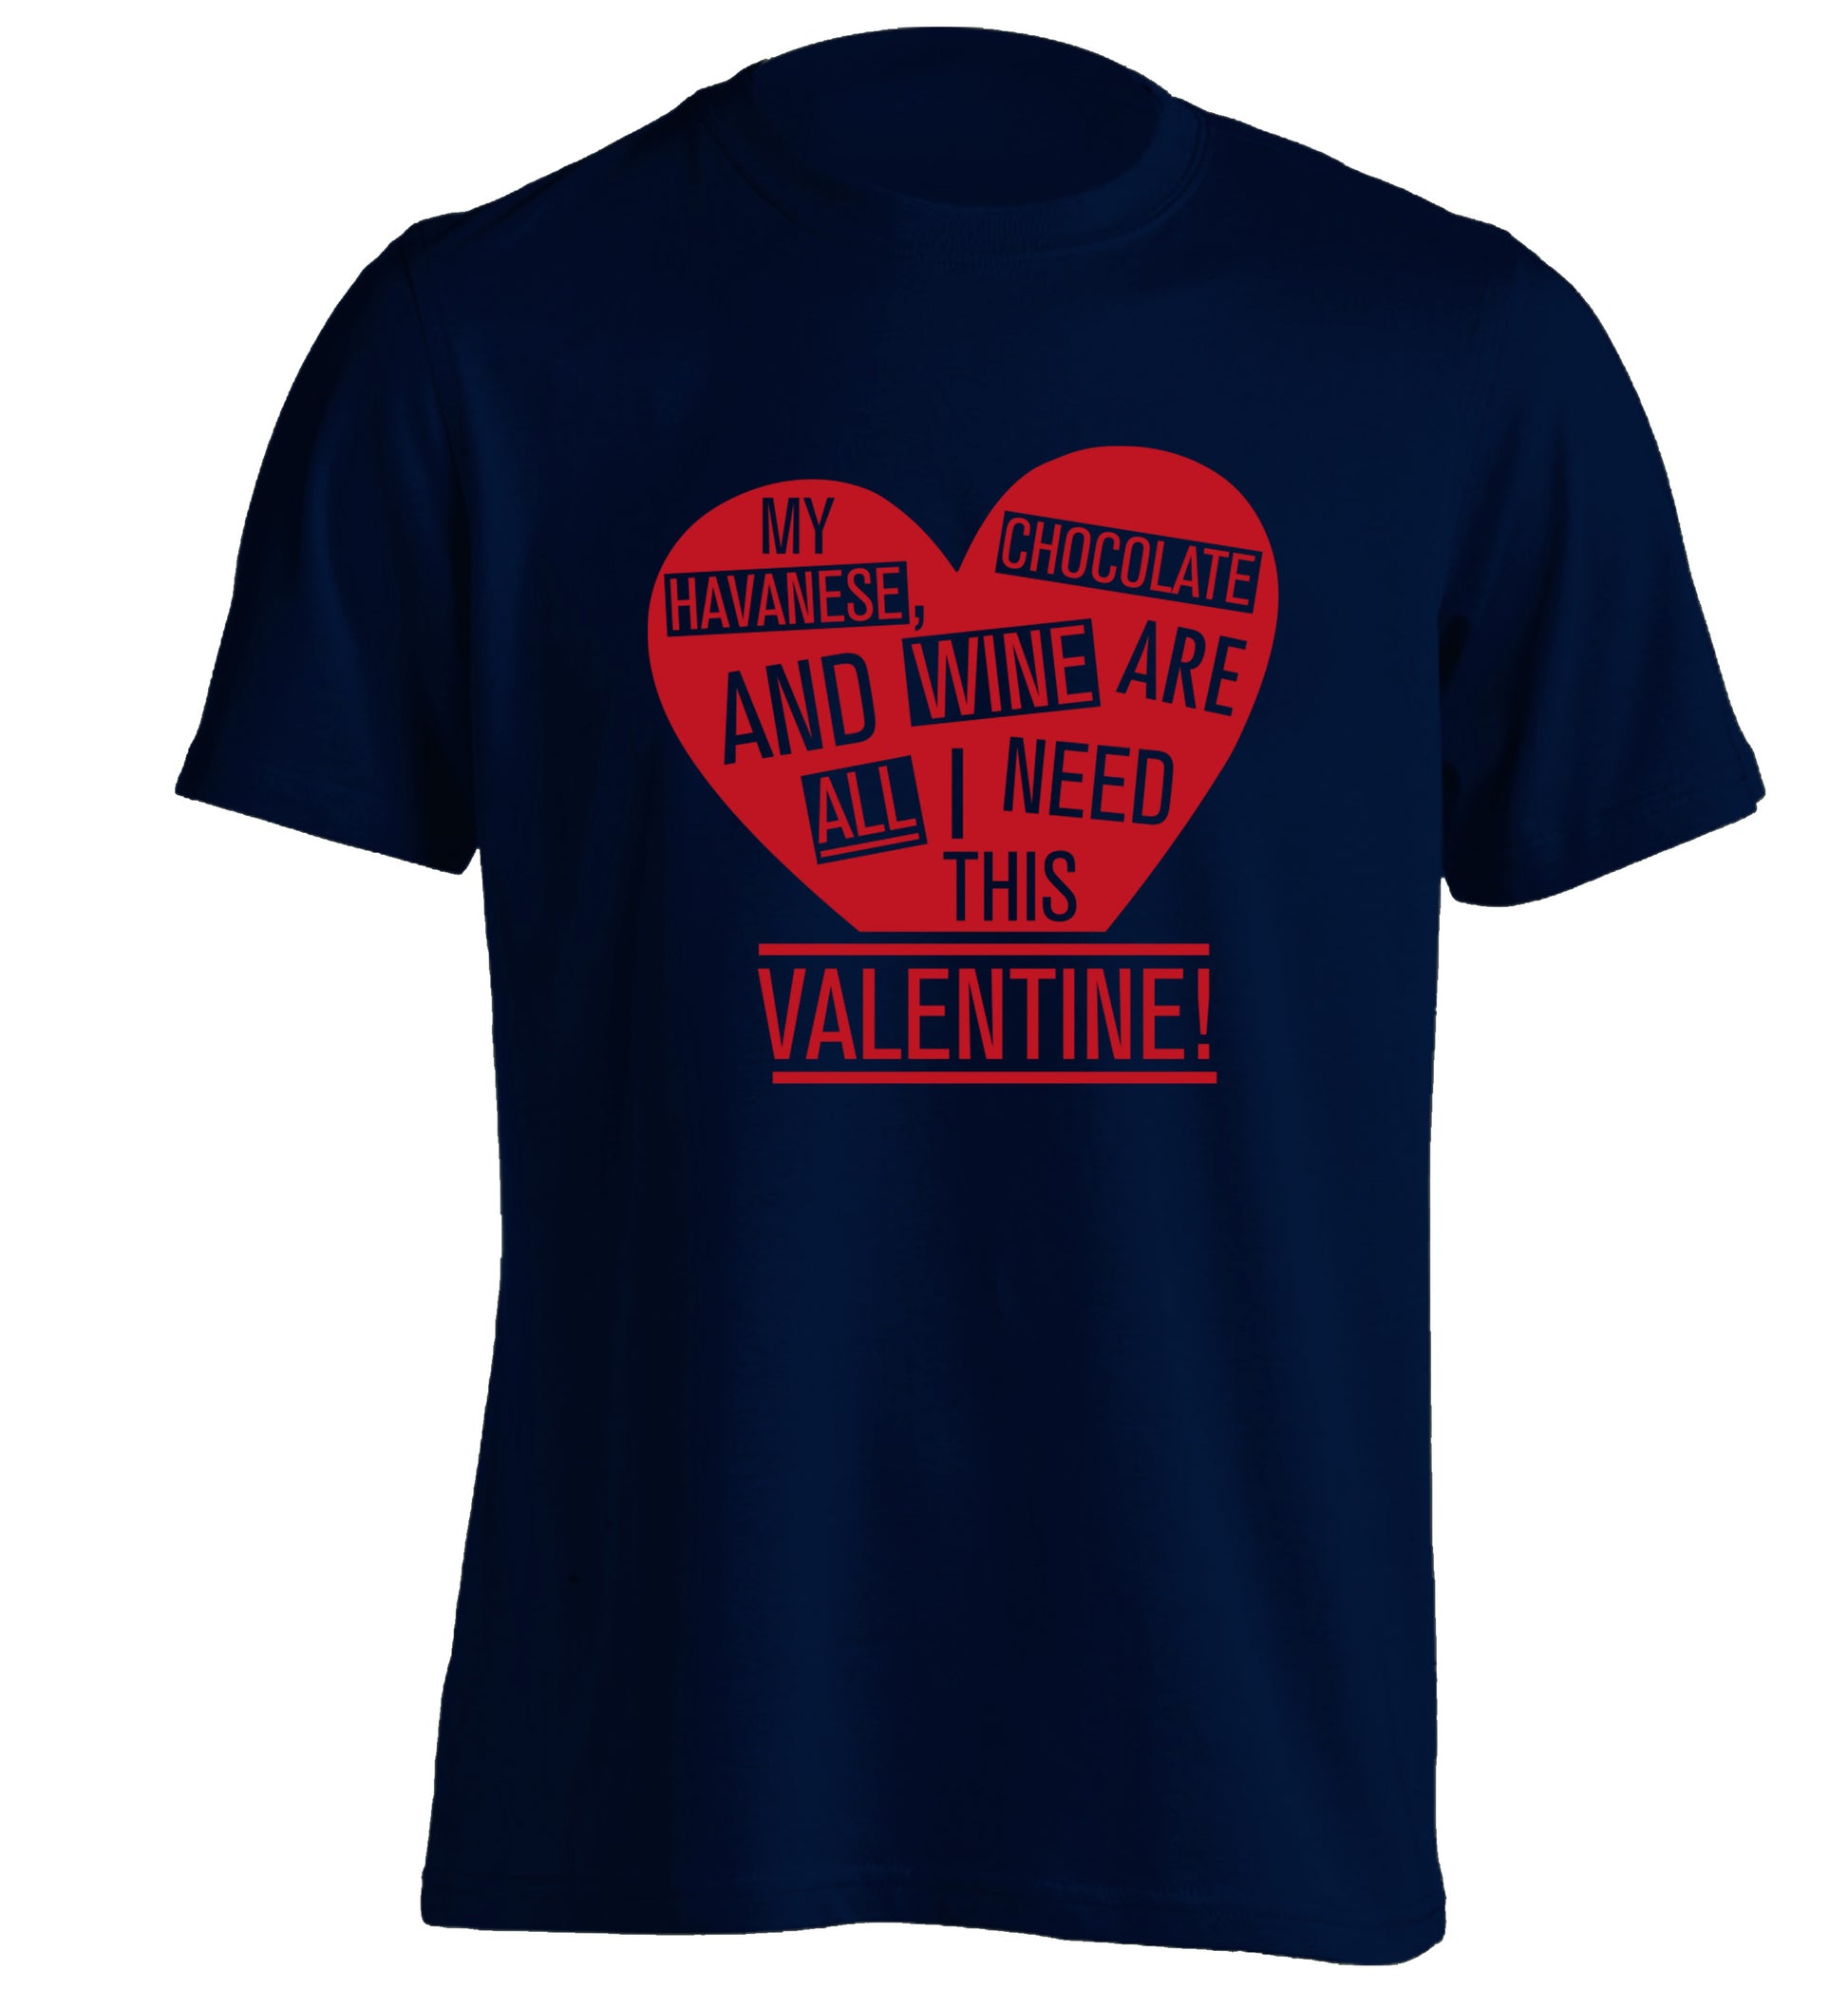 My havanese, chocolate and wine are all I need this valentine! adults unisex navy Tshirt 2XL